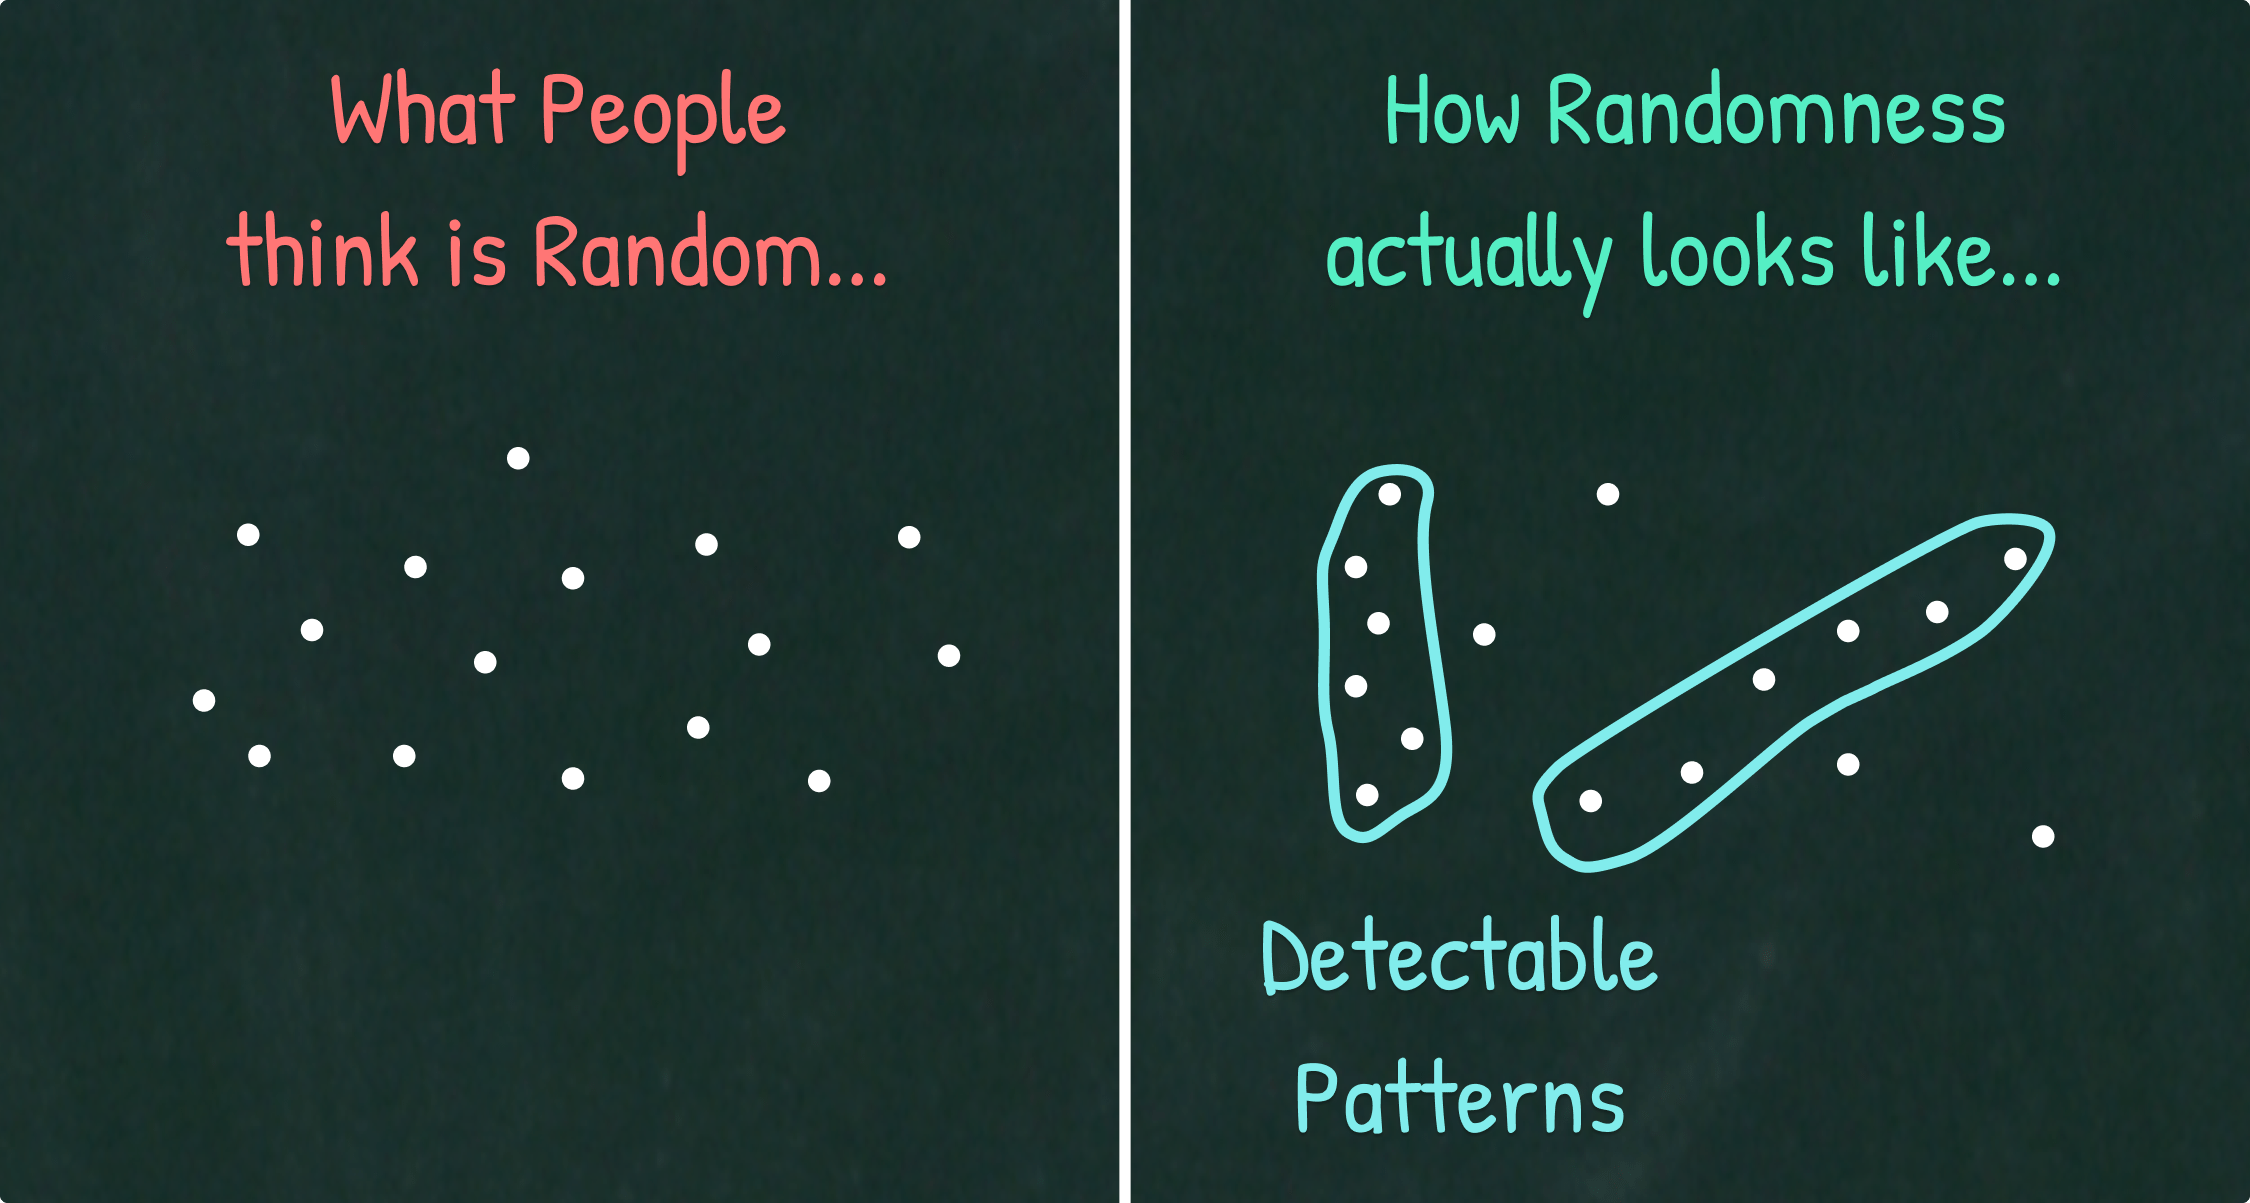 Dots perfectly distributed (fake randomness) vs. Dots showing detectable patterns (real randomness)